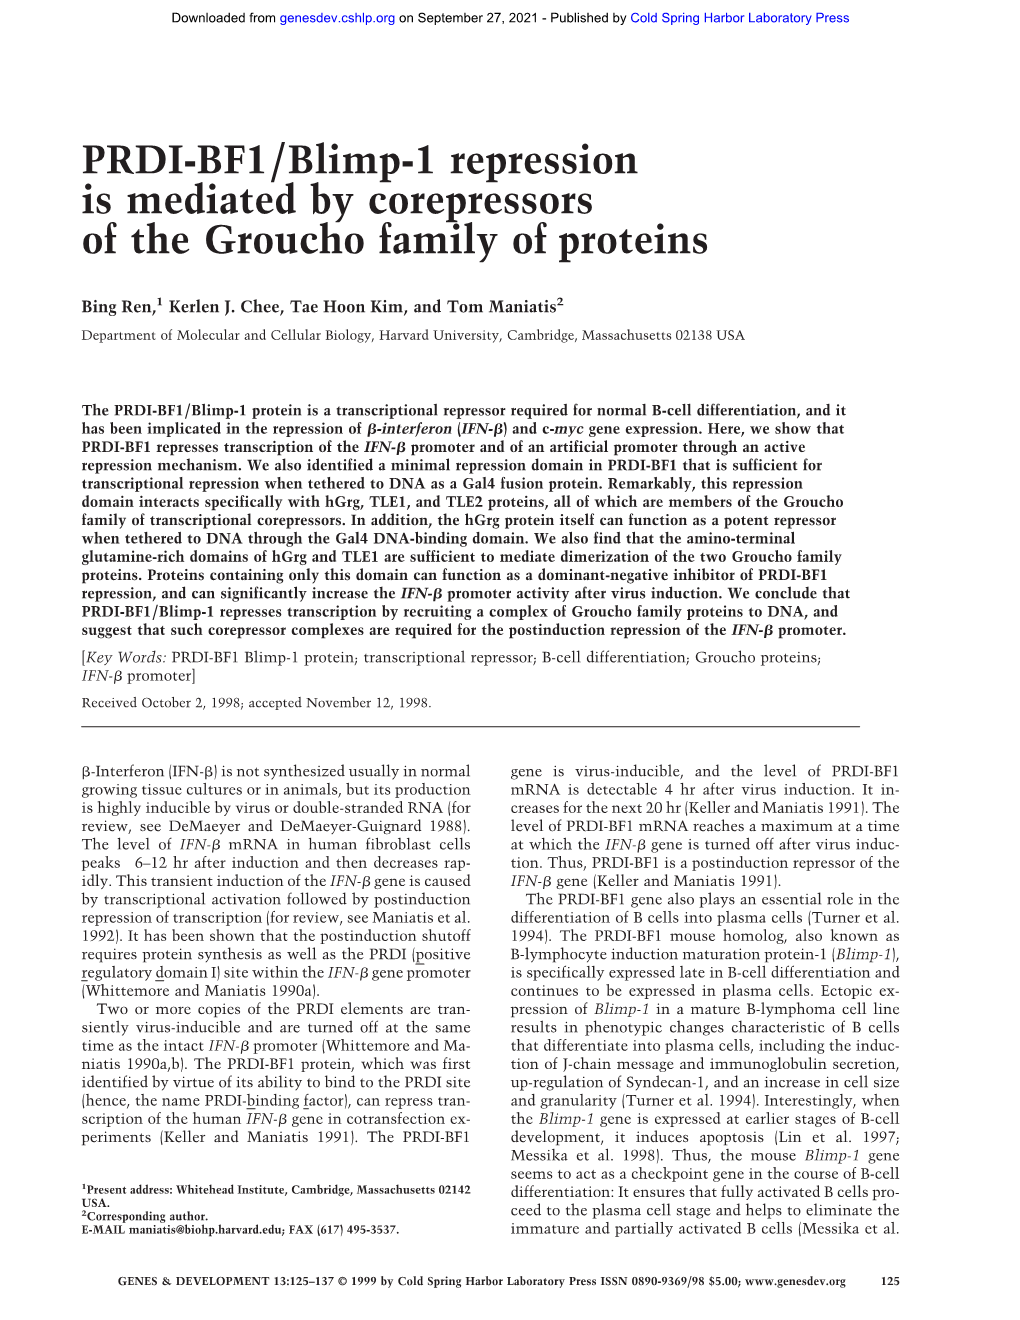 PRDI-BF1/Blimp-1 Repression Is Mediated by Corepressors of the Groucho Family of Proteins